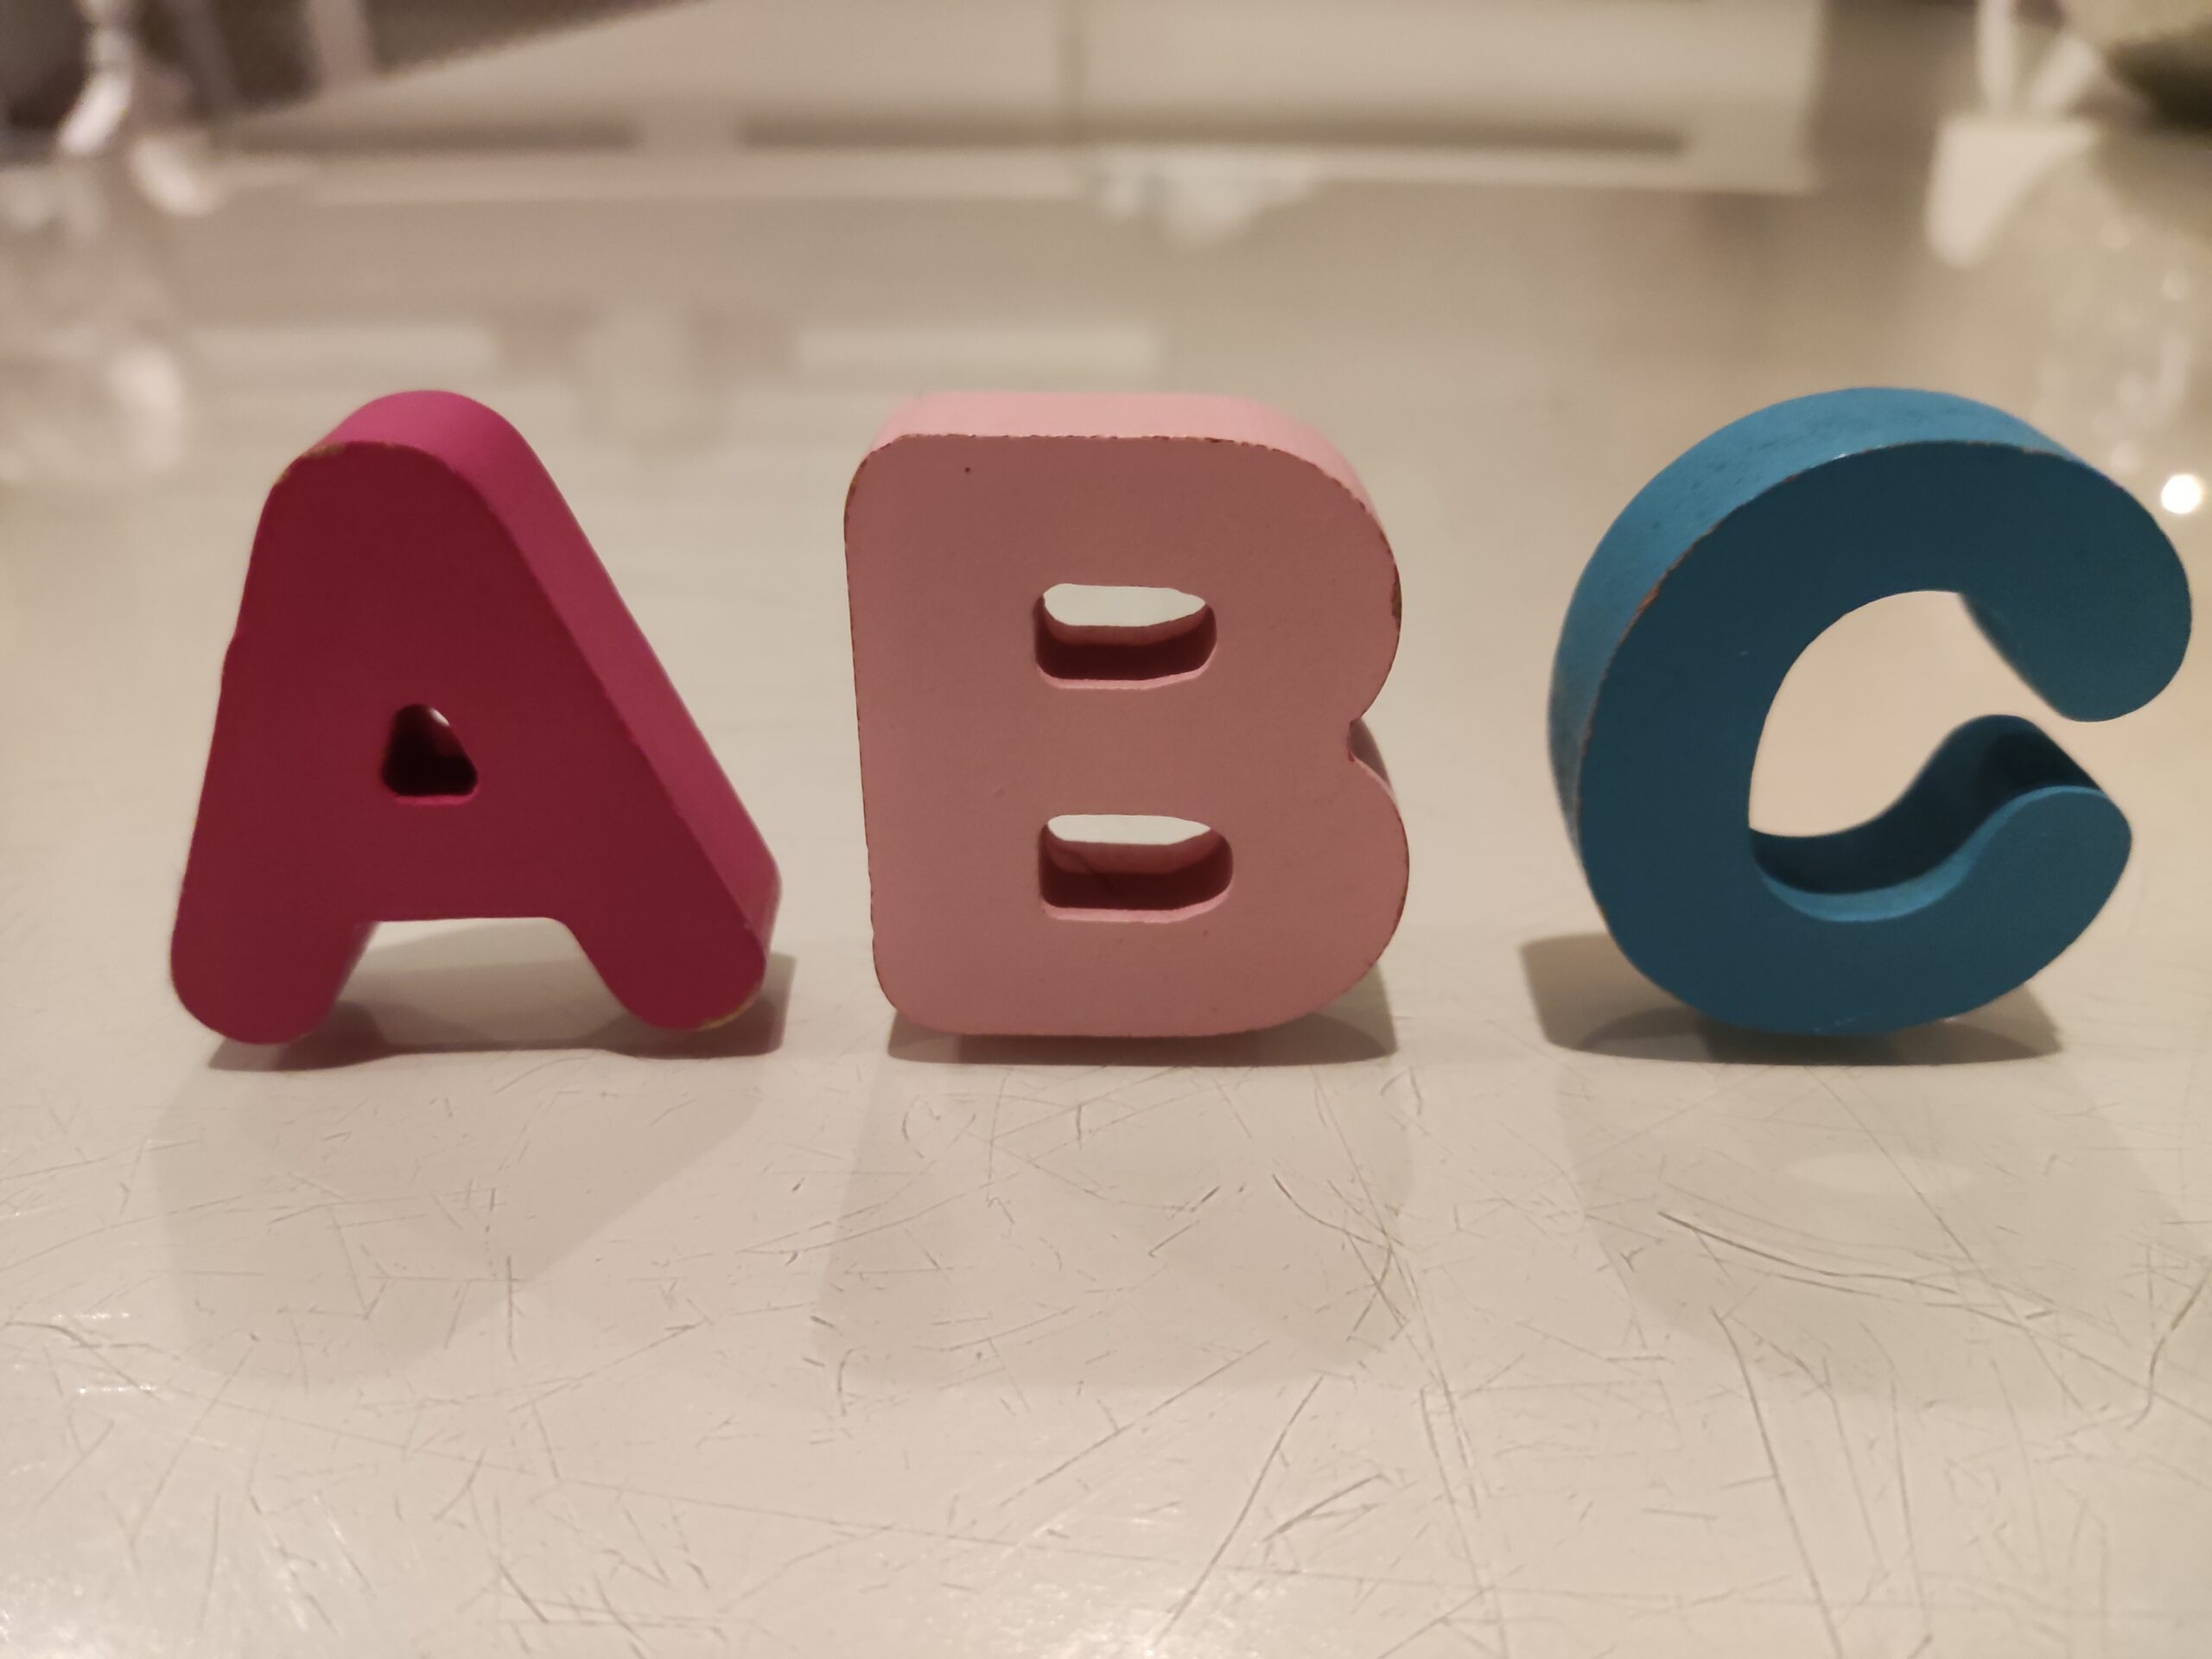 Autistic child obsessed with alphabet 